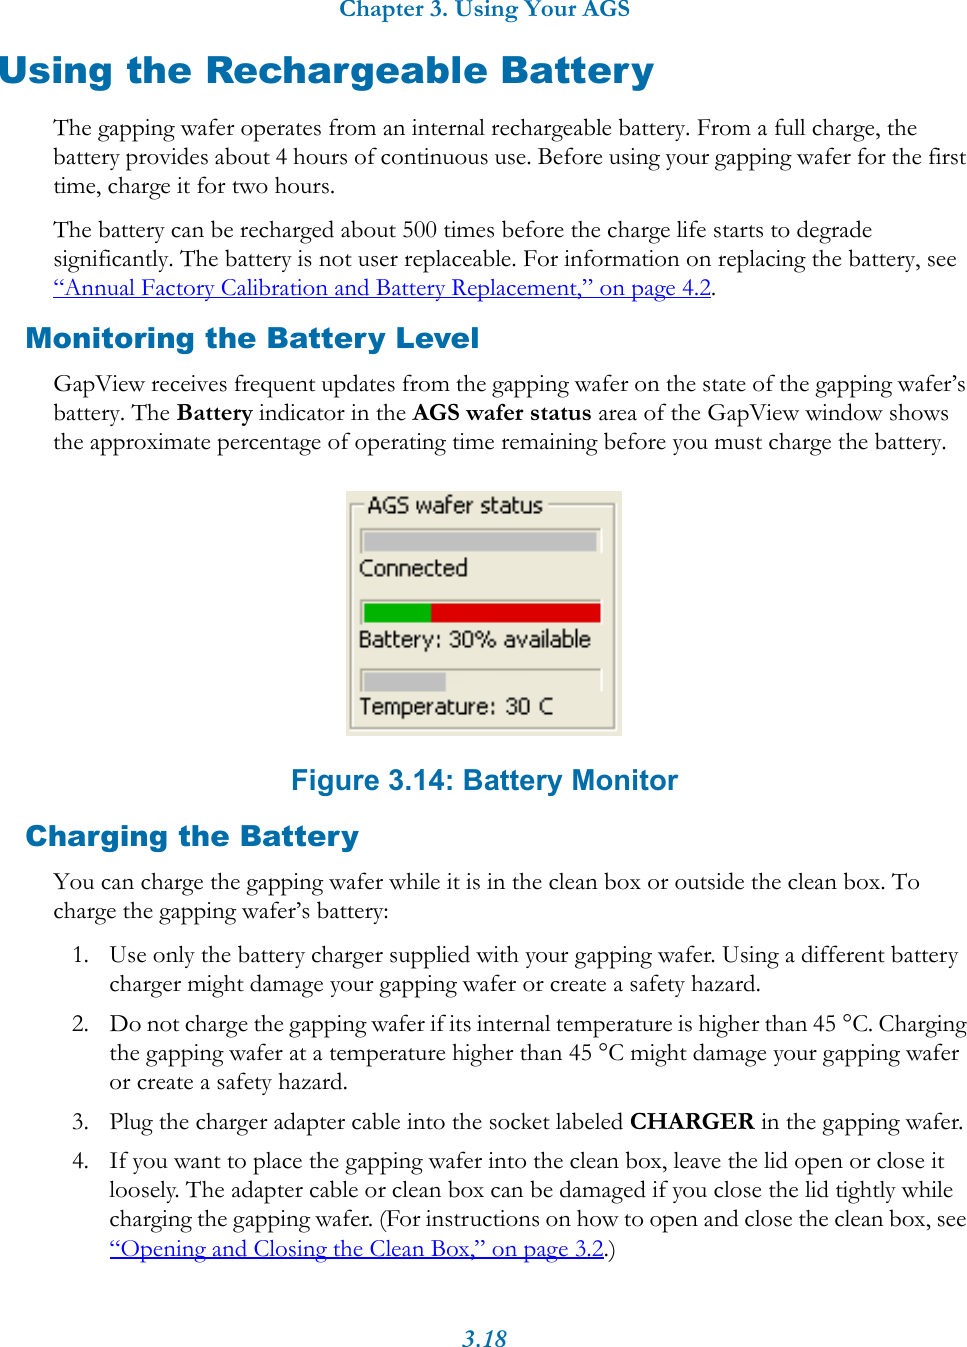 Chapter 3. Using Your AGS3.18Using the Rechargeable BatteryThe gapping wafer operates from an internal rechargeable battery. From a full charge, the battery provides about 4 hours of continuous use. Before using your gapping wafer for the first time, charge it for two hours.The battery can be recharged about 500 times before the charge life starts to degrade significantly. The battery is not user replaceable. For information on replacing the battery, see “Annual Factory Calibration and Battery Replacement,” on page 4.2.Monitoring the Battery LevelGapView receives frequent updates from the gapping wafer on the state of the gapping wafer’s battery. The Battery indicator in the AGS wafer status area of the GapView window shows the approximate percentage of operating time remaining before you must charge the battery. Figure 3.14: Battery MonitorCharging the BatteryYou can charge the gapping wafer while it is in the clean box or outside the clean box. To charge the gapping wafer’s battery:1. Use only the battery charger supplied with your gapping wafer. Using a different battery charger might damage your gapping wafer or create a safety hazard.2. Do not charge the gapping wafer if its internal temperature is higher than 45 °C. Charging the gapping wafer at a temperature higher than 45 °C might damage your gapping wafer or create a safety hazard.3. Plug the charger adapter cable into the socket labeled CHARGER in the gapping wafer.4. If you want to place the gapping wafer into the clean box, leave the lid open or close it loosely. The adapter cable or clean box can be damaged if you close the lid tightly while charging the gapping wafer. (For instructions on how to open and close the clean box, see “Opening and Closing the Clean Box,” on page 3.2.)